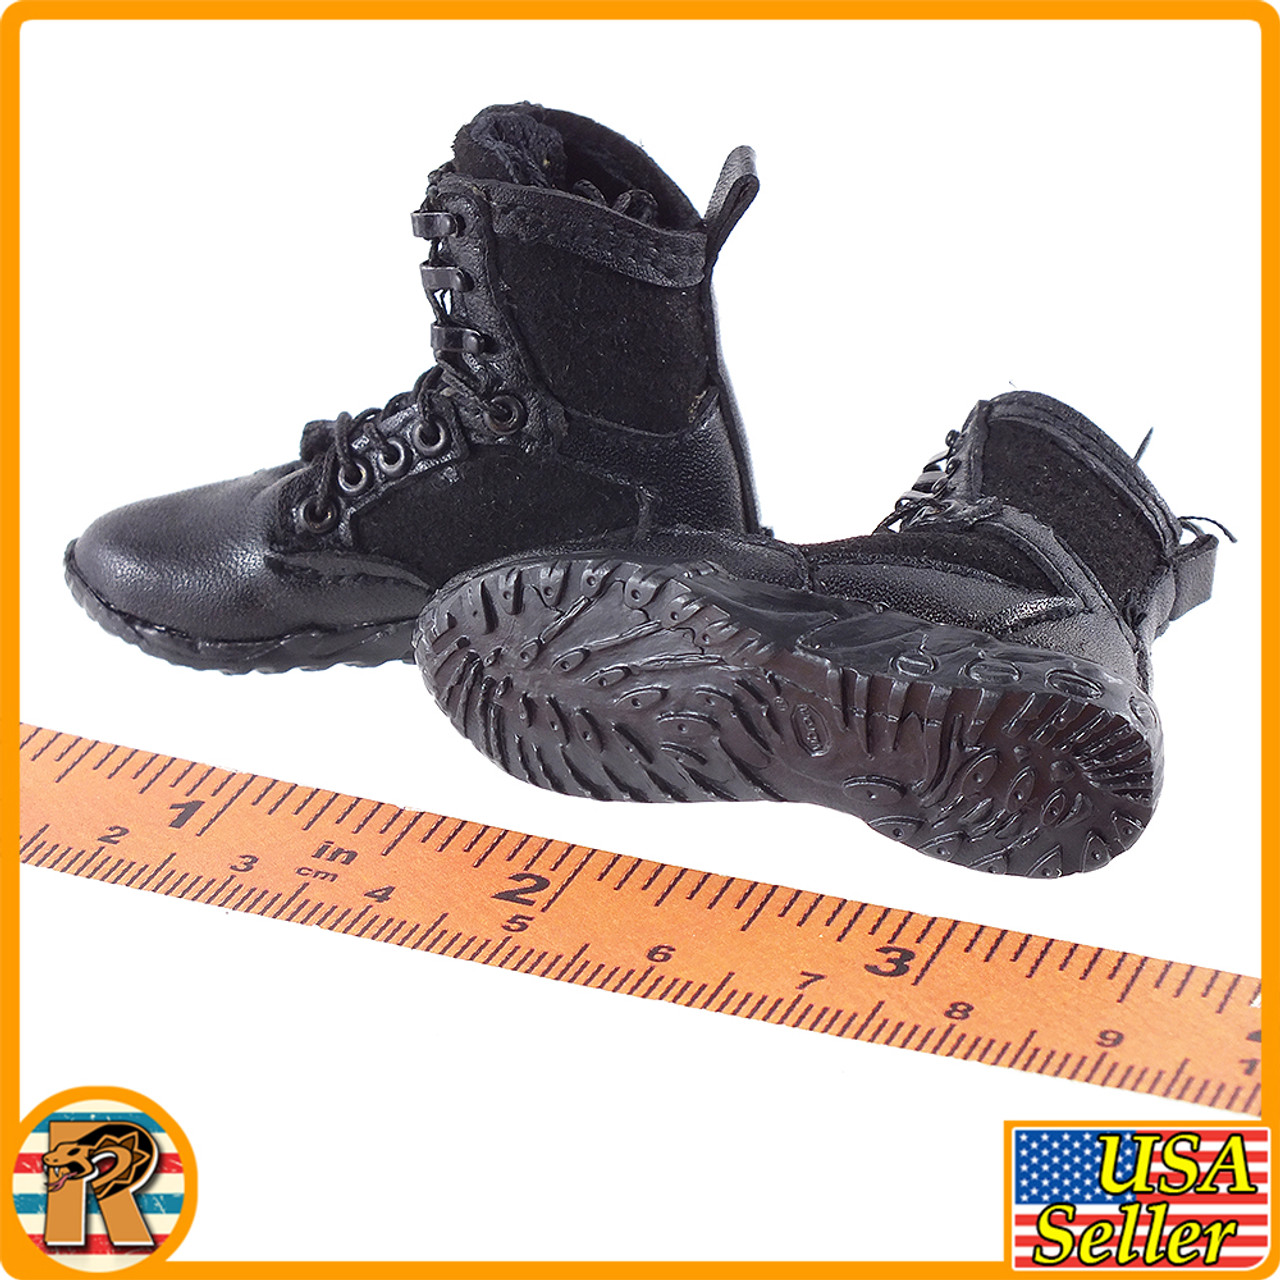 Nick Hard Boiled Sheriff - Boots (for Feet) - 1/6 Scale -